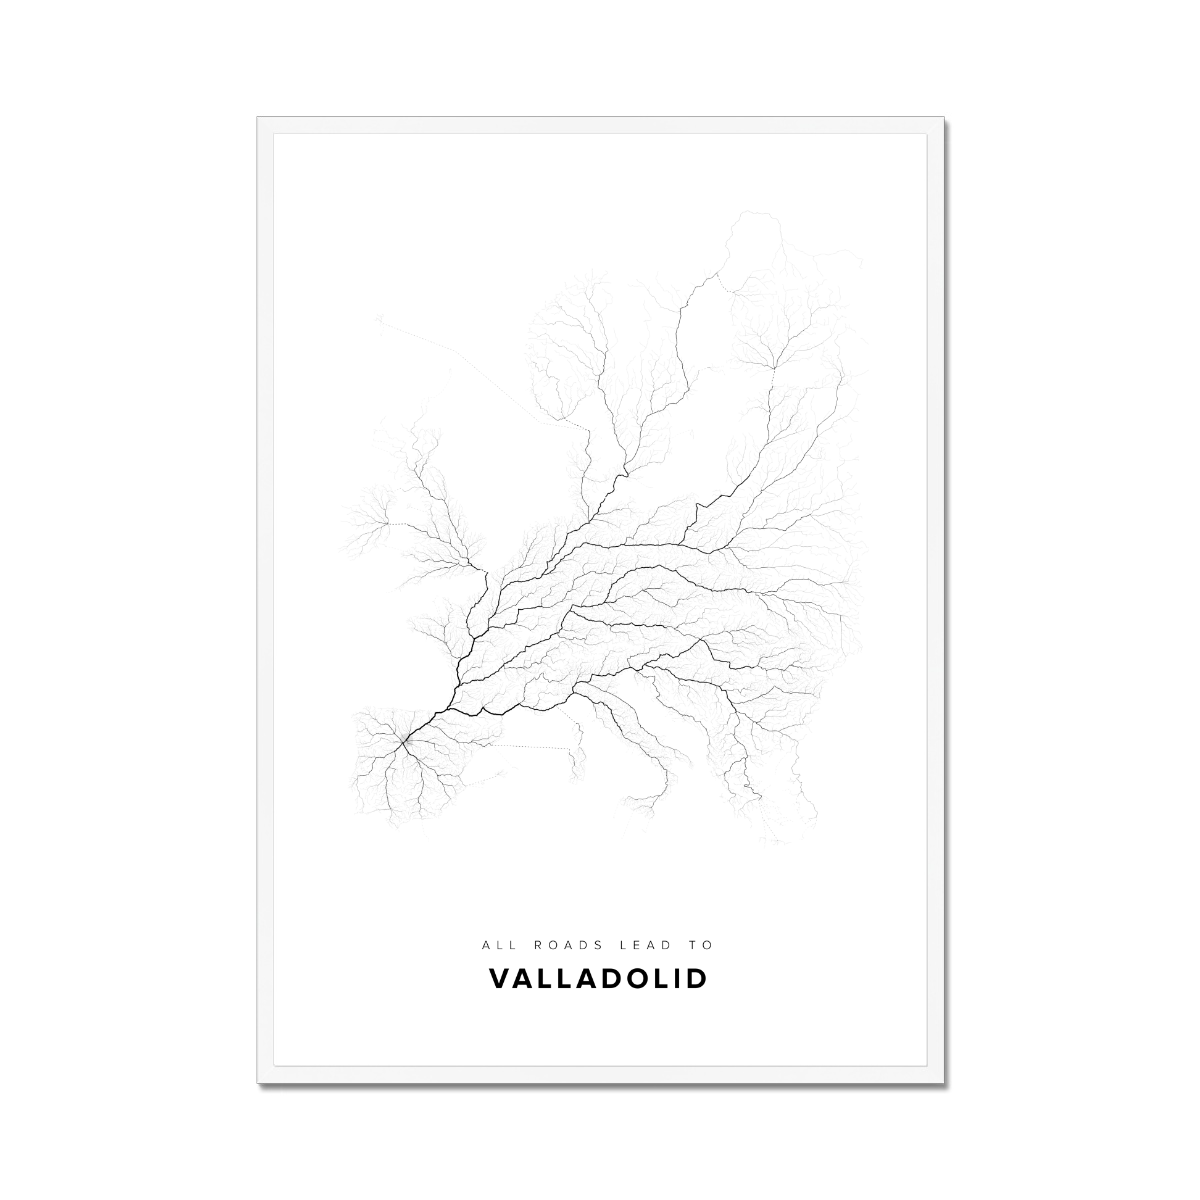 All roads lead to Valladolid (Spain) Fine Art Map Print